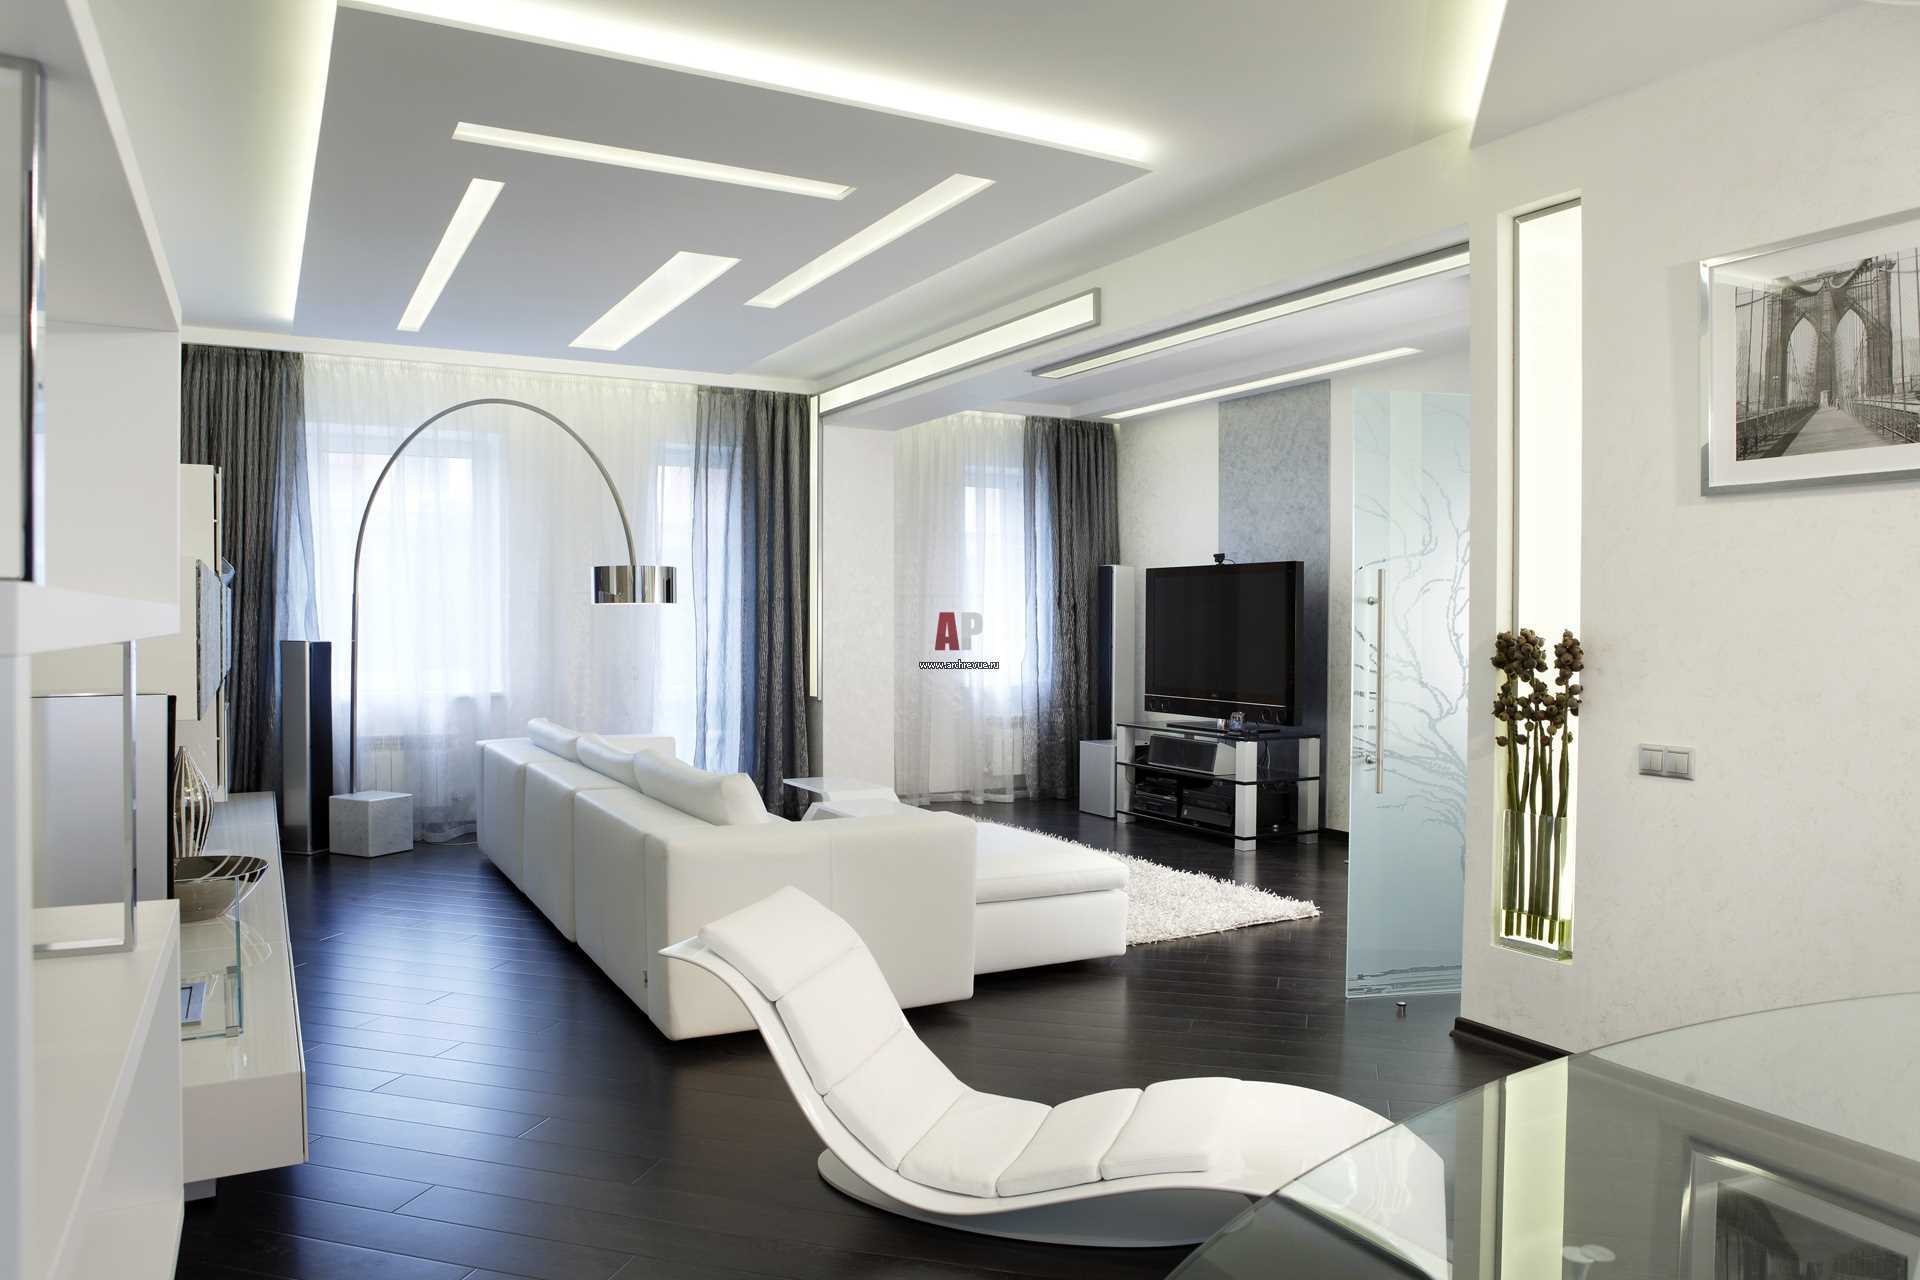 an example of a bright decor of a living room in the style of minimalism